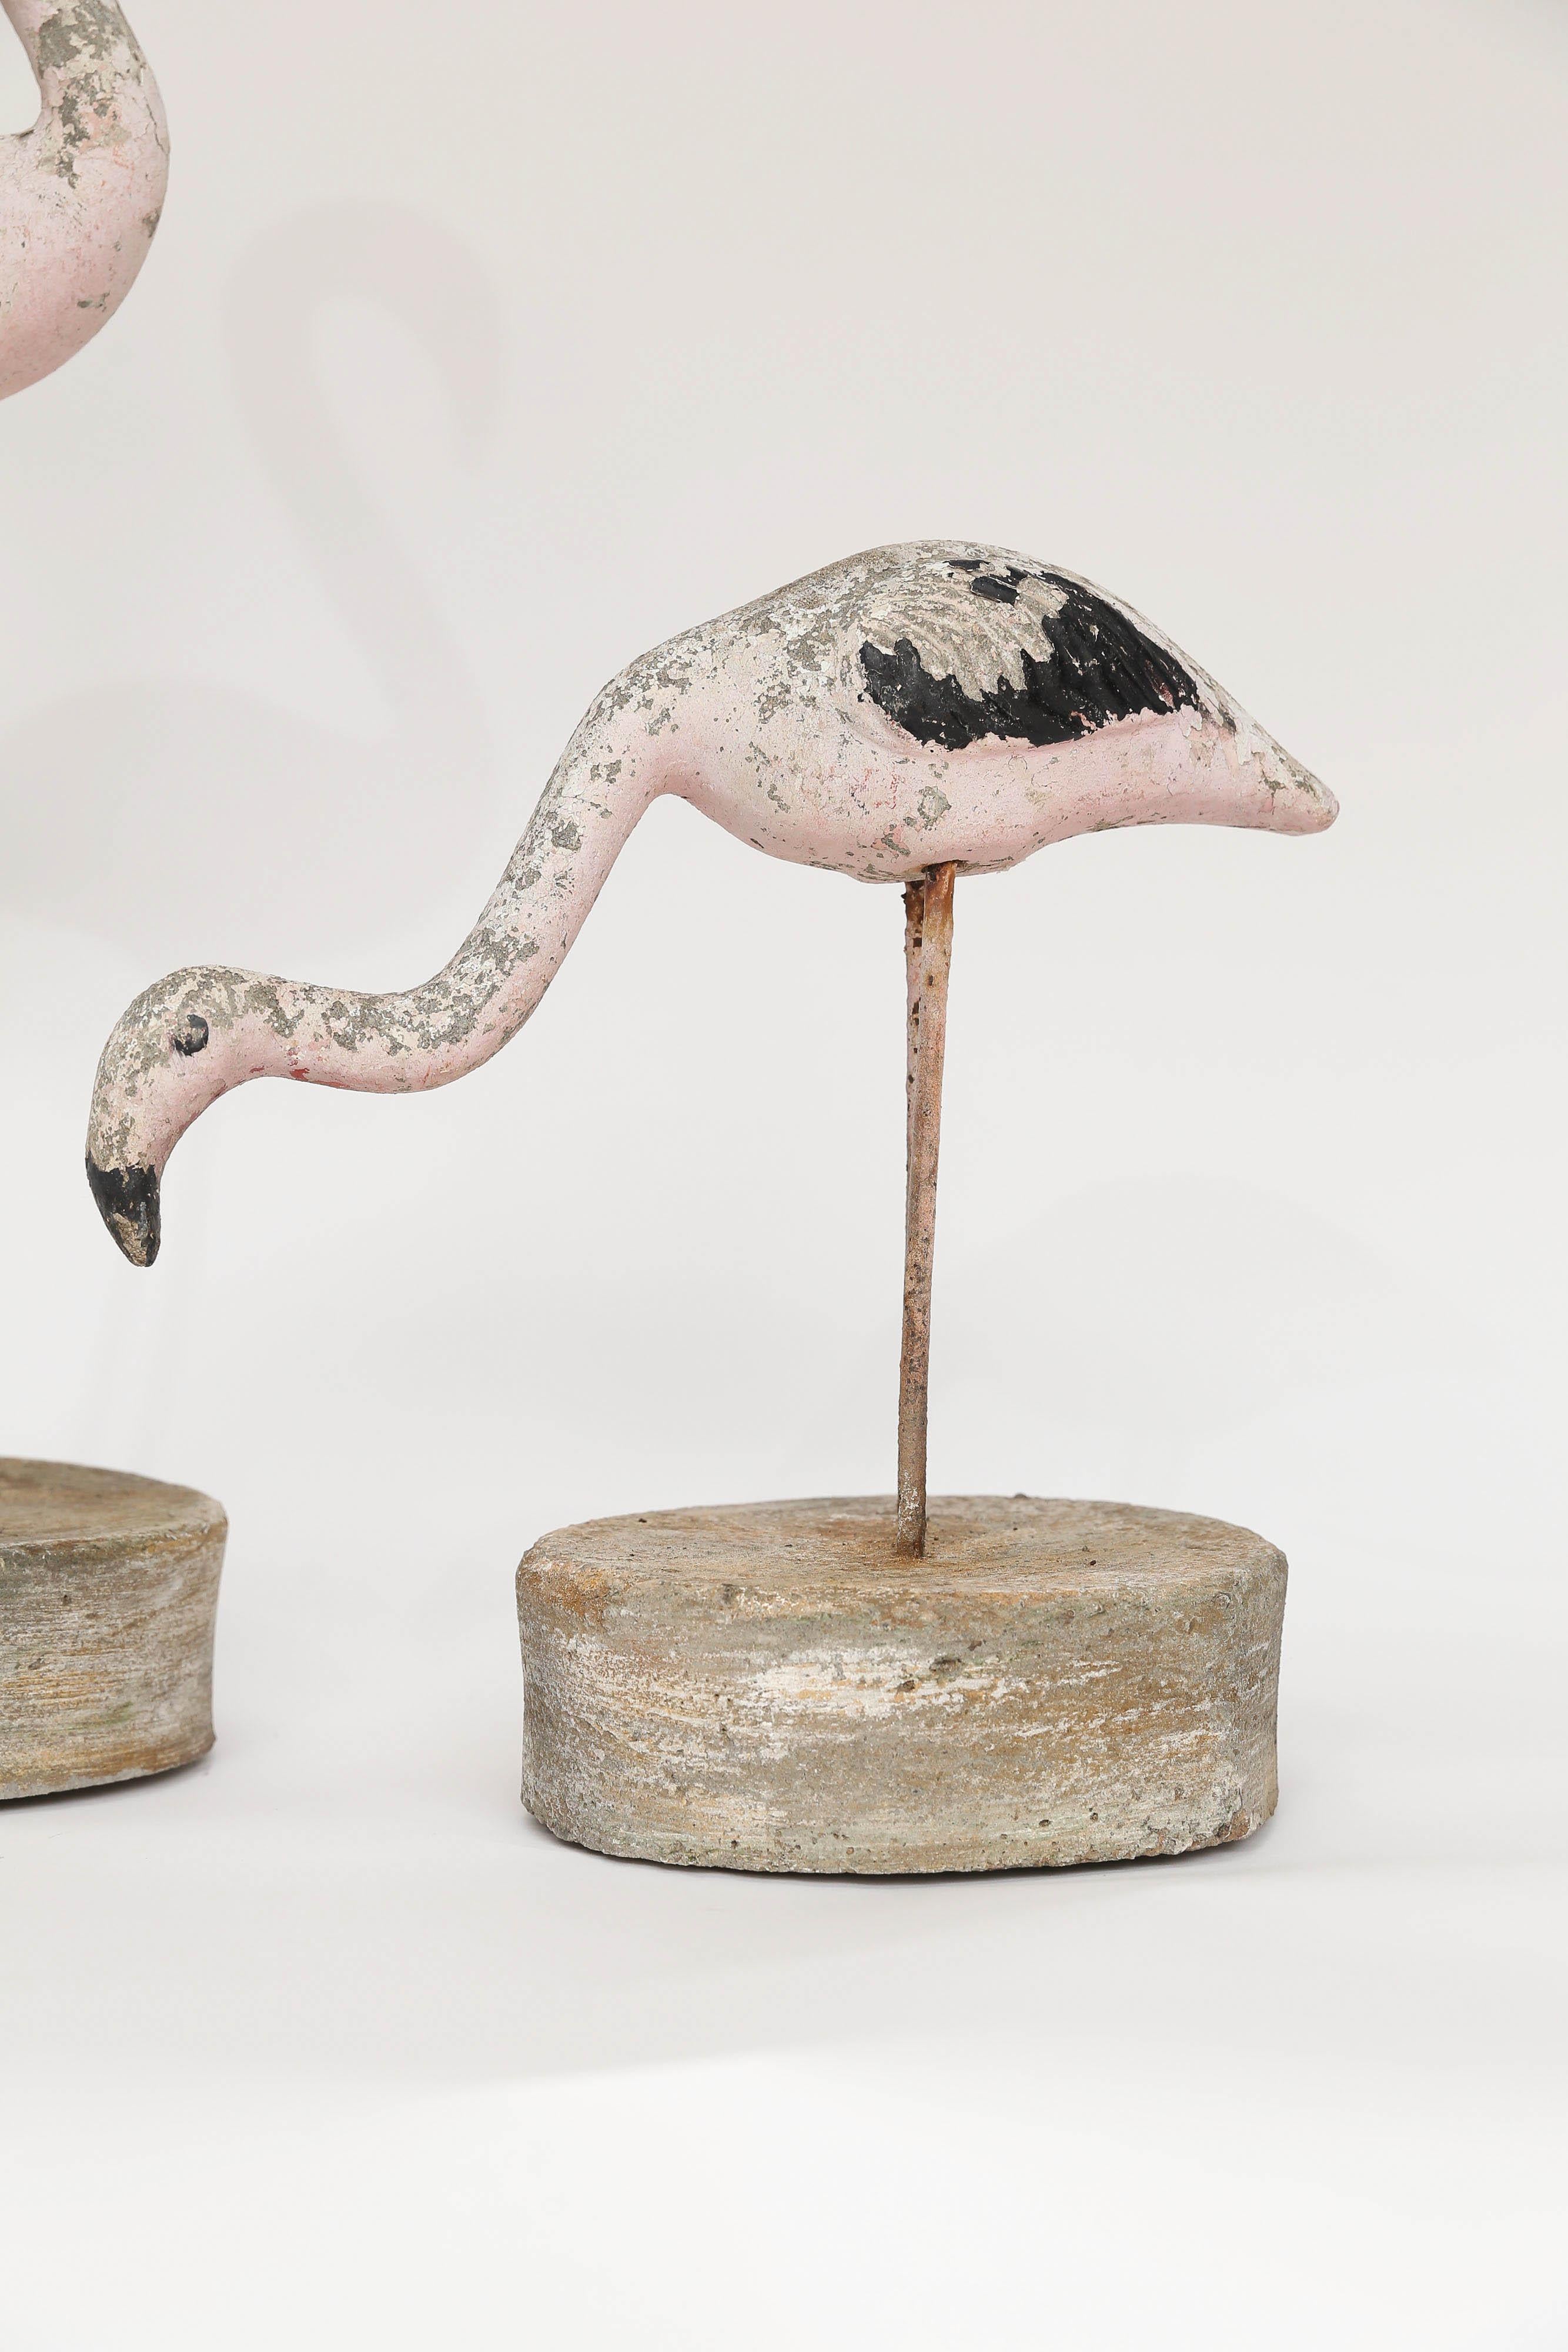 A lovely pair of concrete flamingos. The concrete birds stand on legs made of iron sunk into a hefty concrete base. The flamingos retain original paint which has been worn to a lovely patina. The upright flamingo body measures 7 inches wide and 3